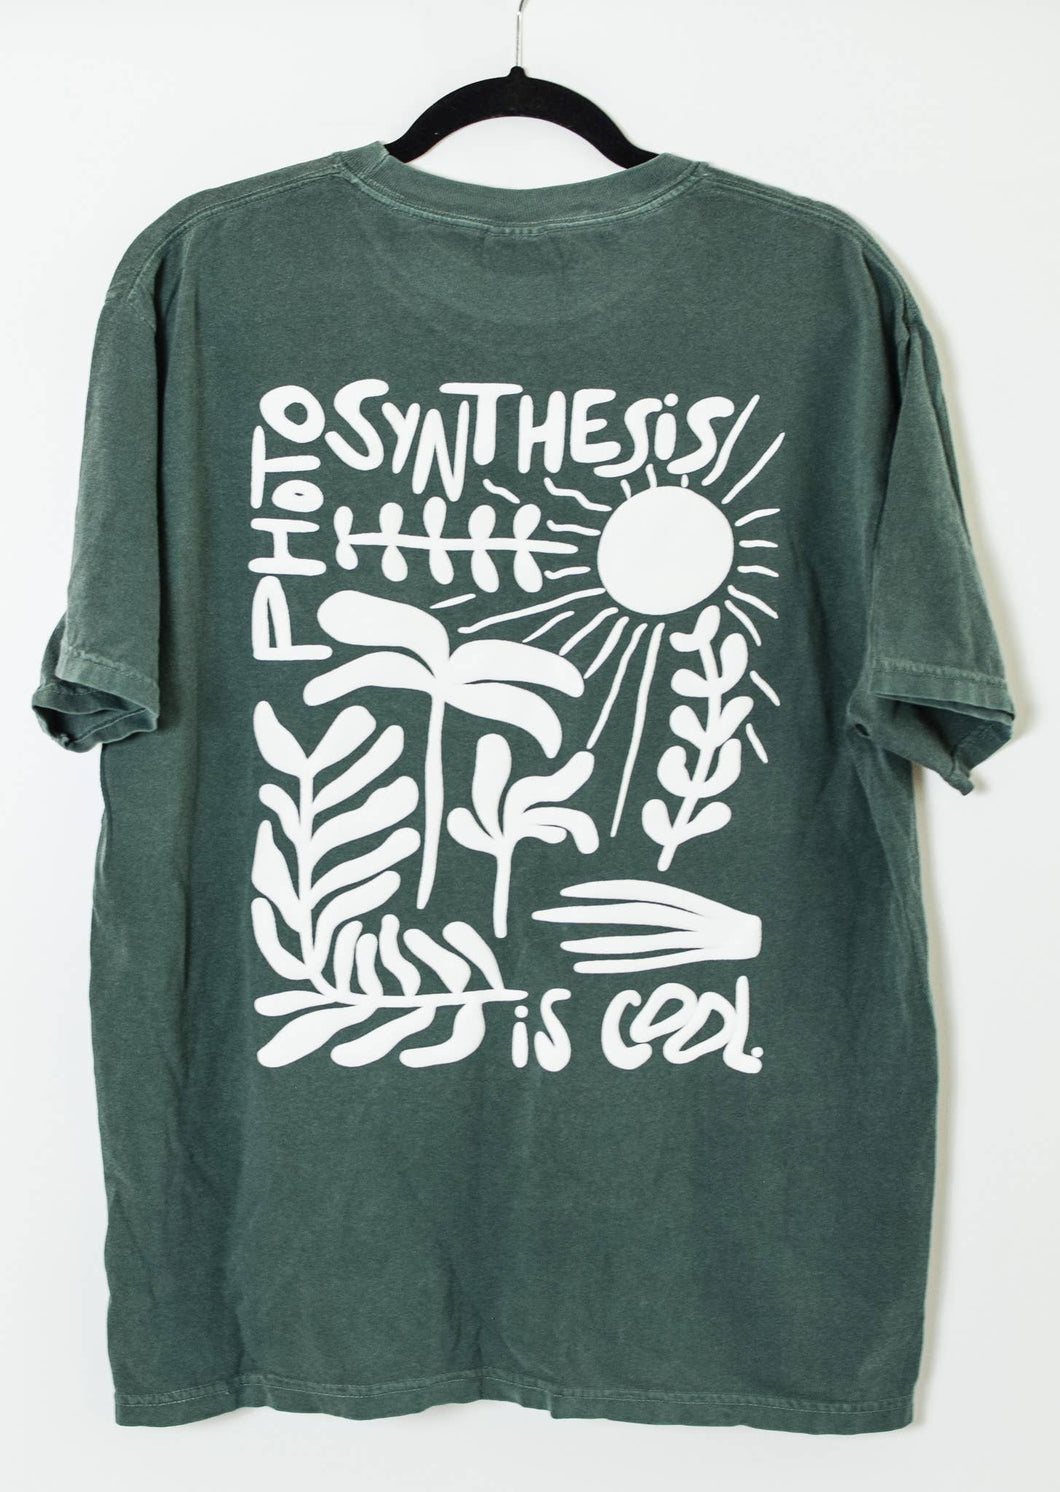 Photosynthesis Is Cool TShirt: L